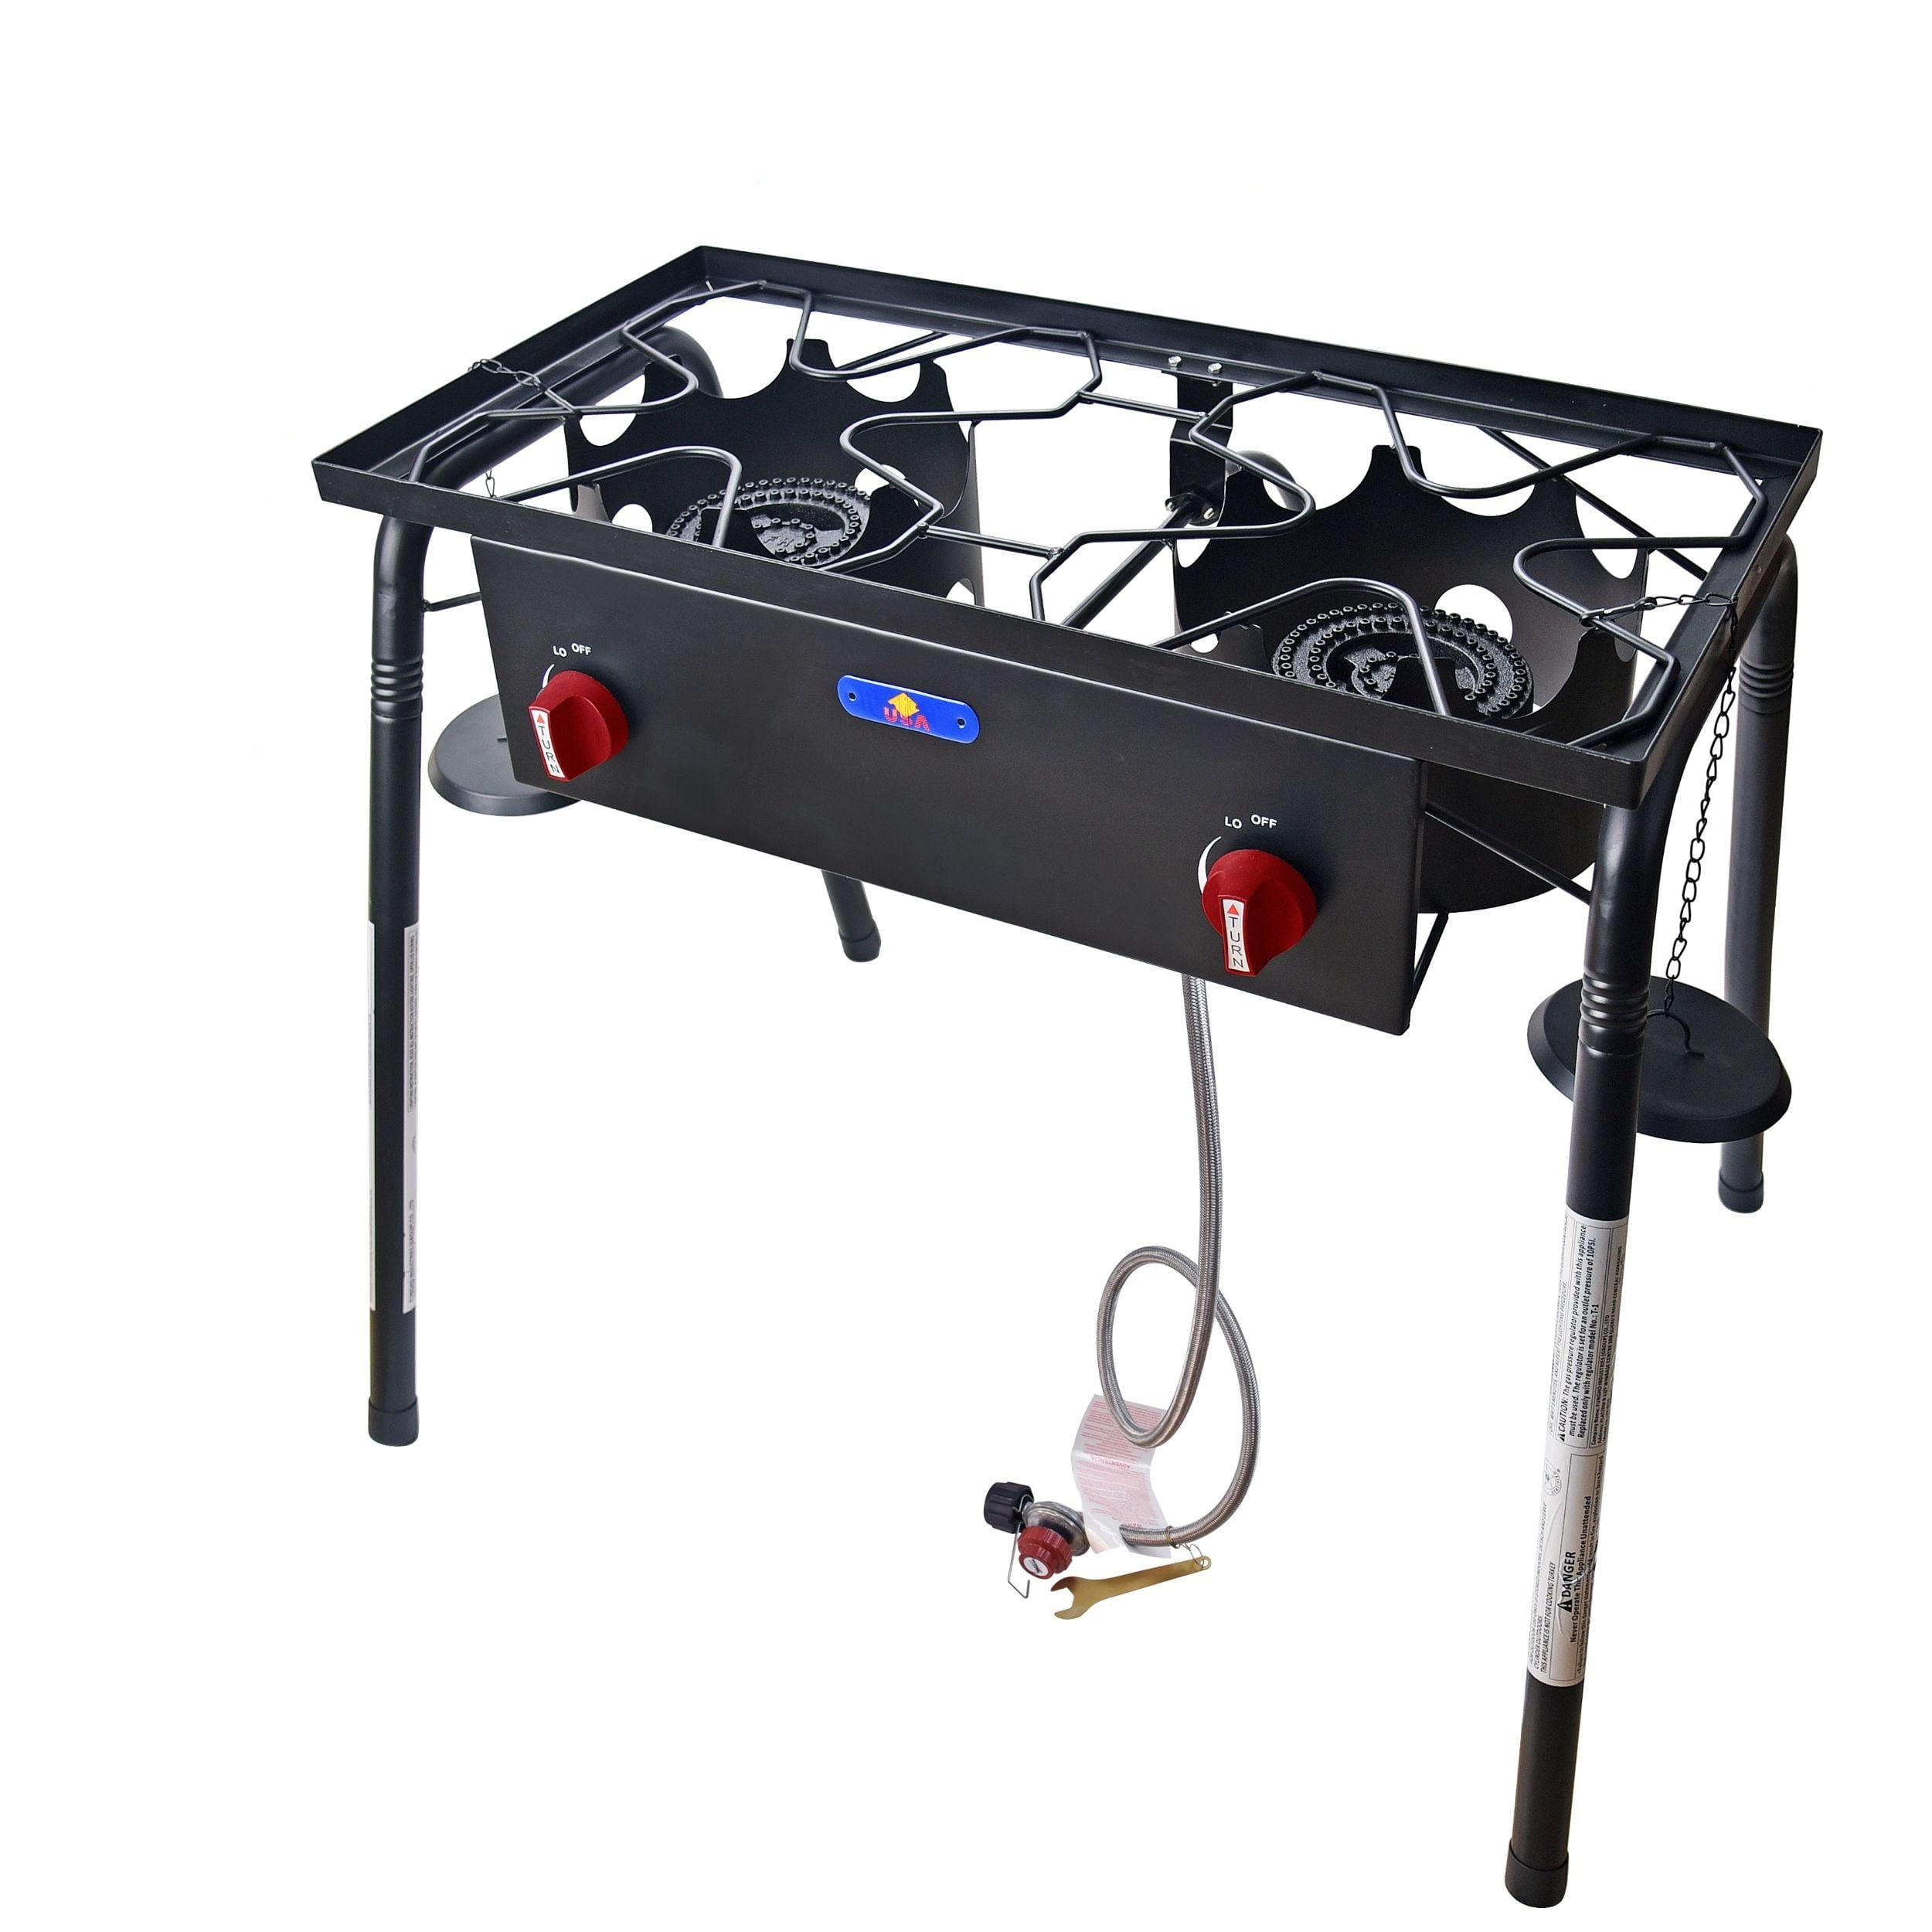 Camping Double Burner Gas Propane Cooker Stove Stand Activity Picnic BBQ Grill 6940350857470